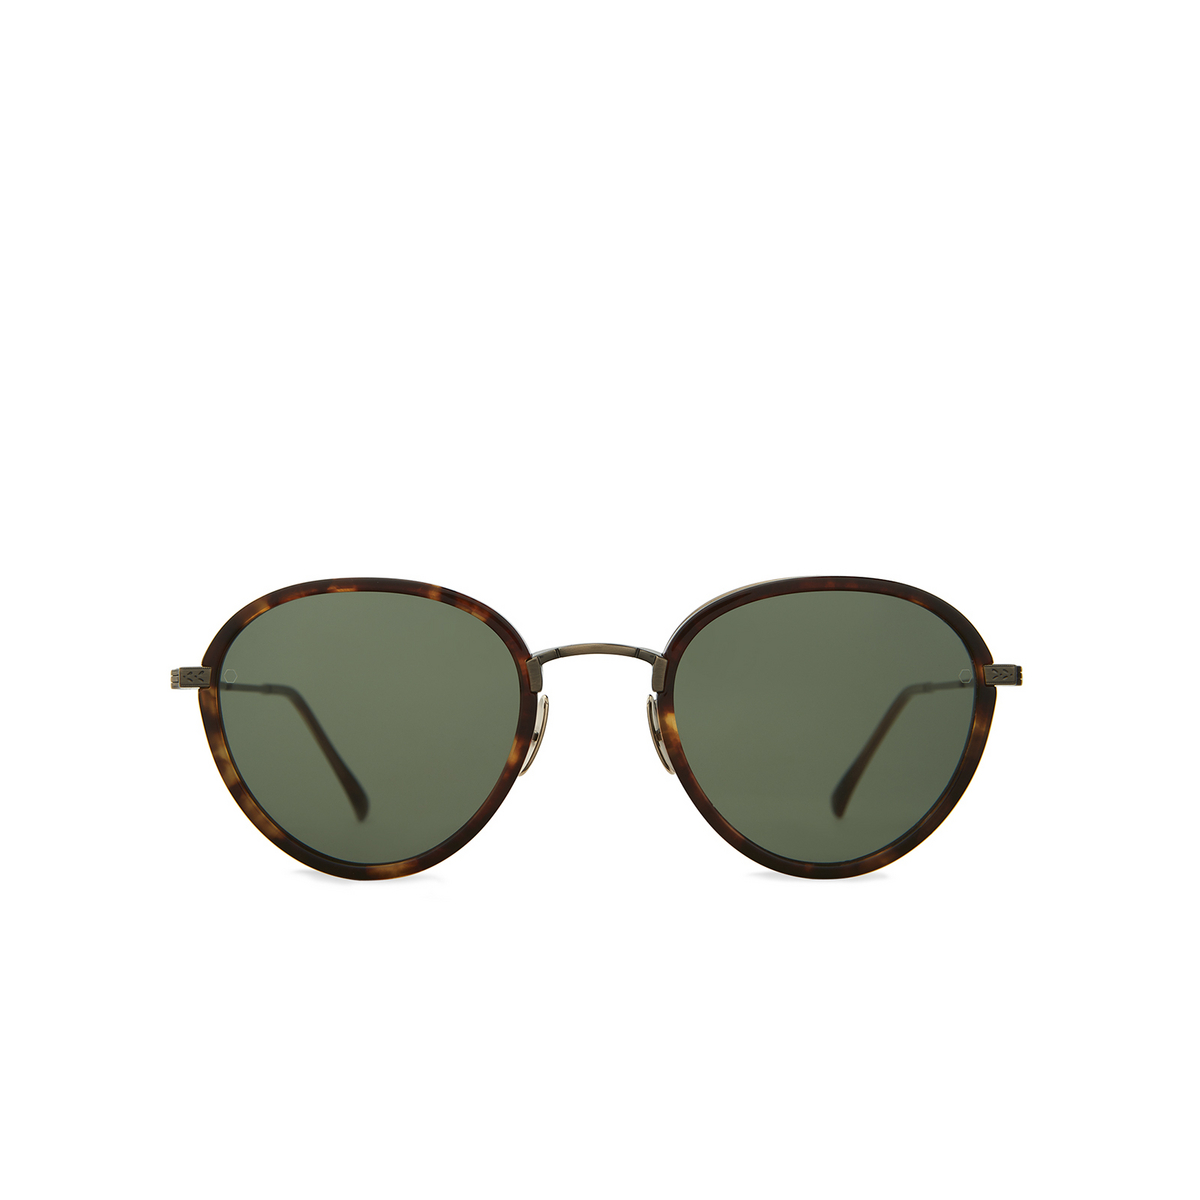 Mr. Leight® Round Sunglasses: Monterey Sl color Maple / Green + Driftwood / Bluelight Mpl/grn+drftwd/blul - front view.